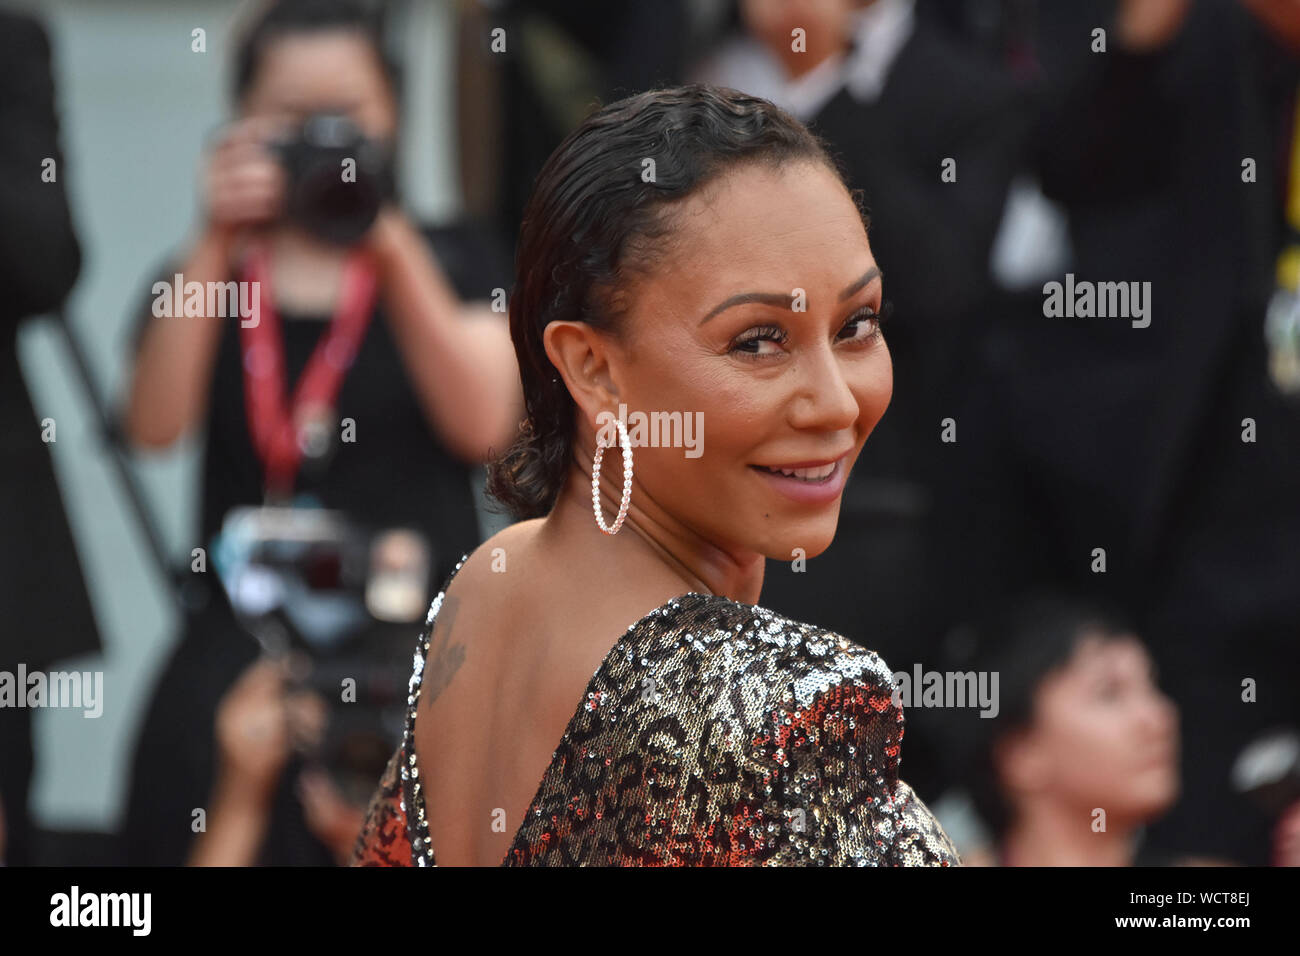 VENICE, Italy. 28th Aug, 2019. Melanie Brown walks the red carpet ahead of the opening ceremony during the 76th Venice Film Festival at Sala Casino on August 28, 2019 in Venice, Italy. Credit: Andrea Merola/Awakening/Alamy Live News Stock Photo